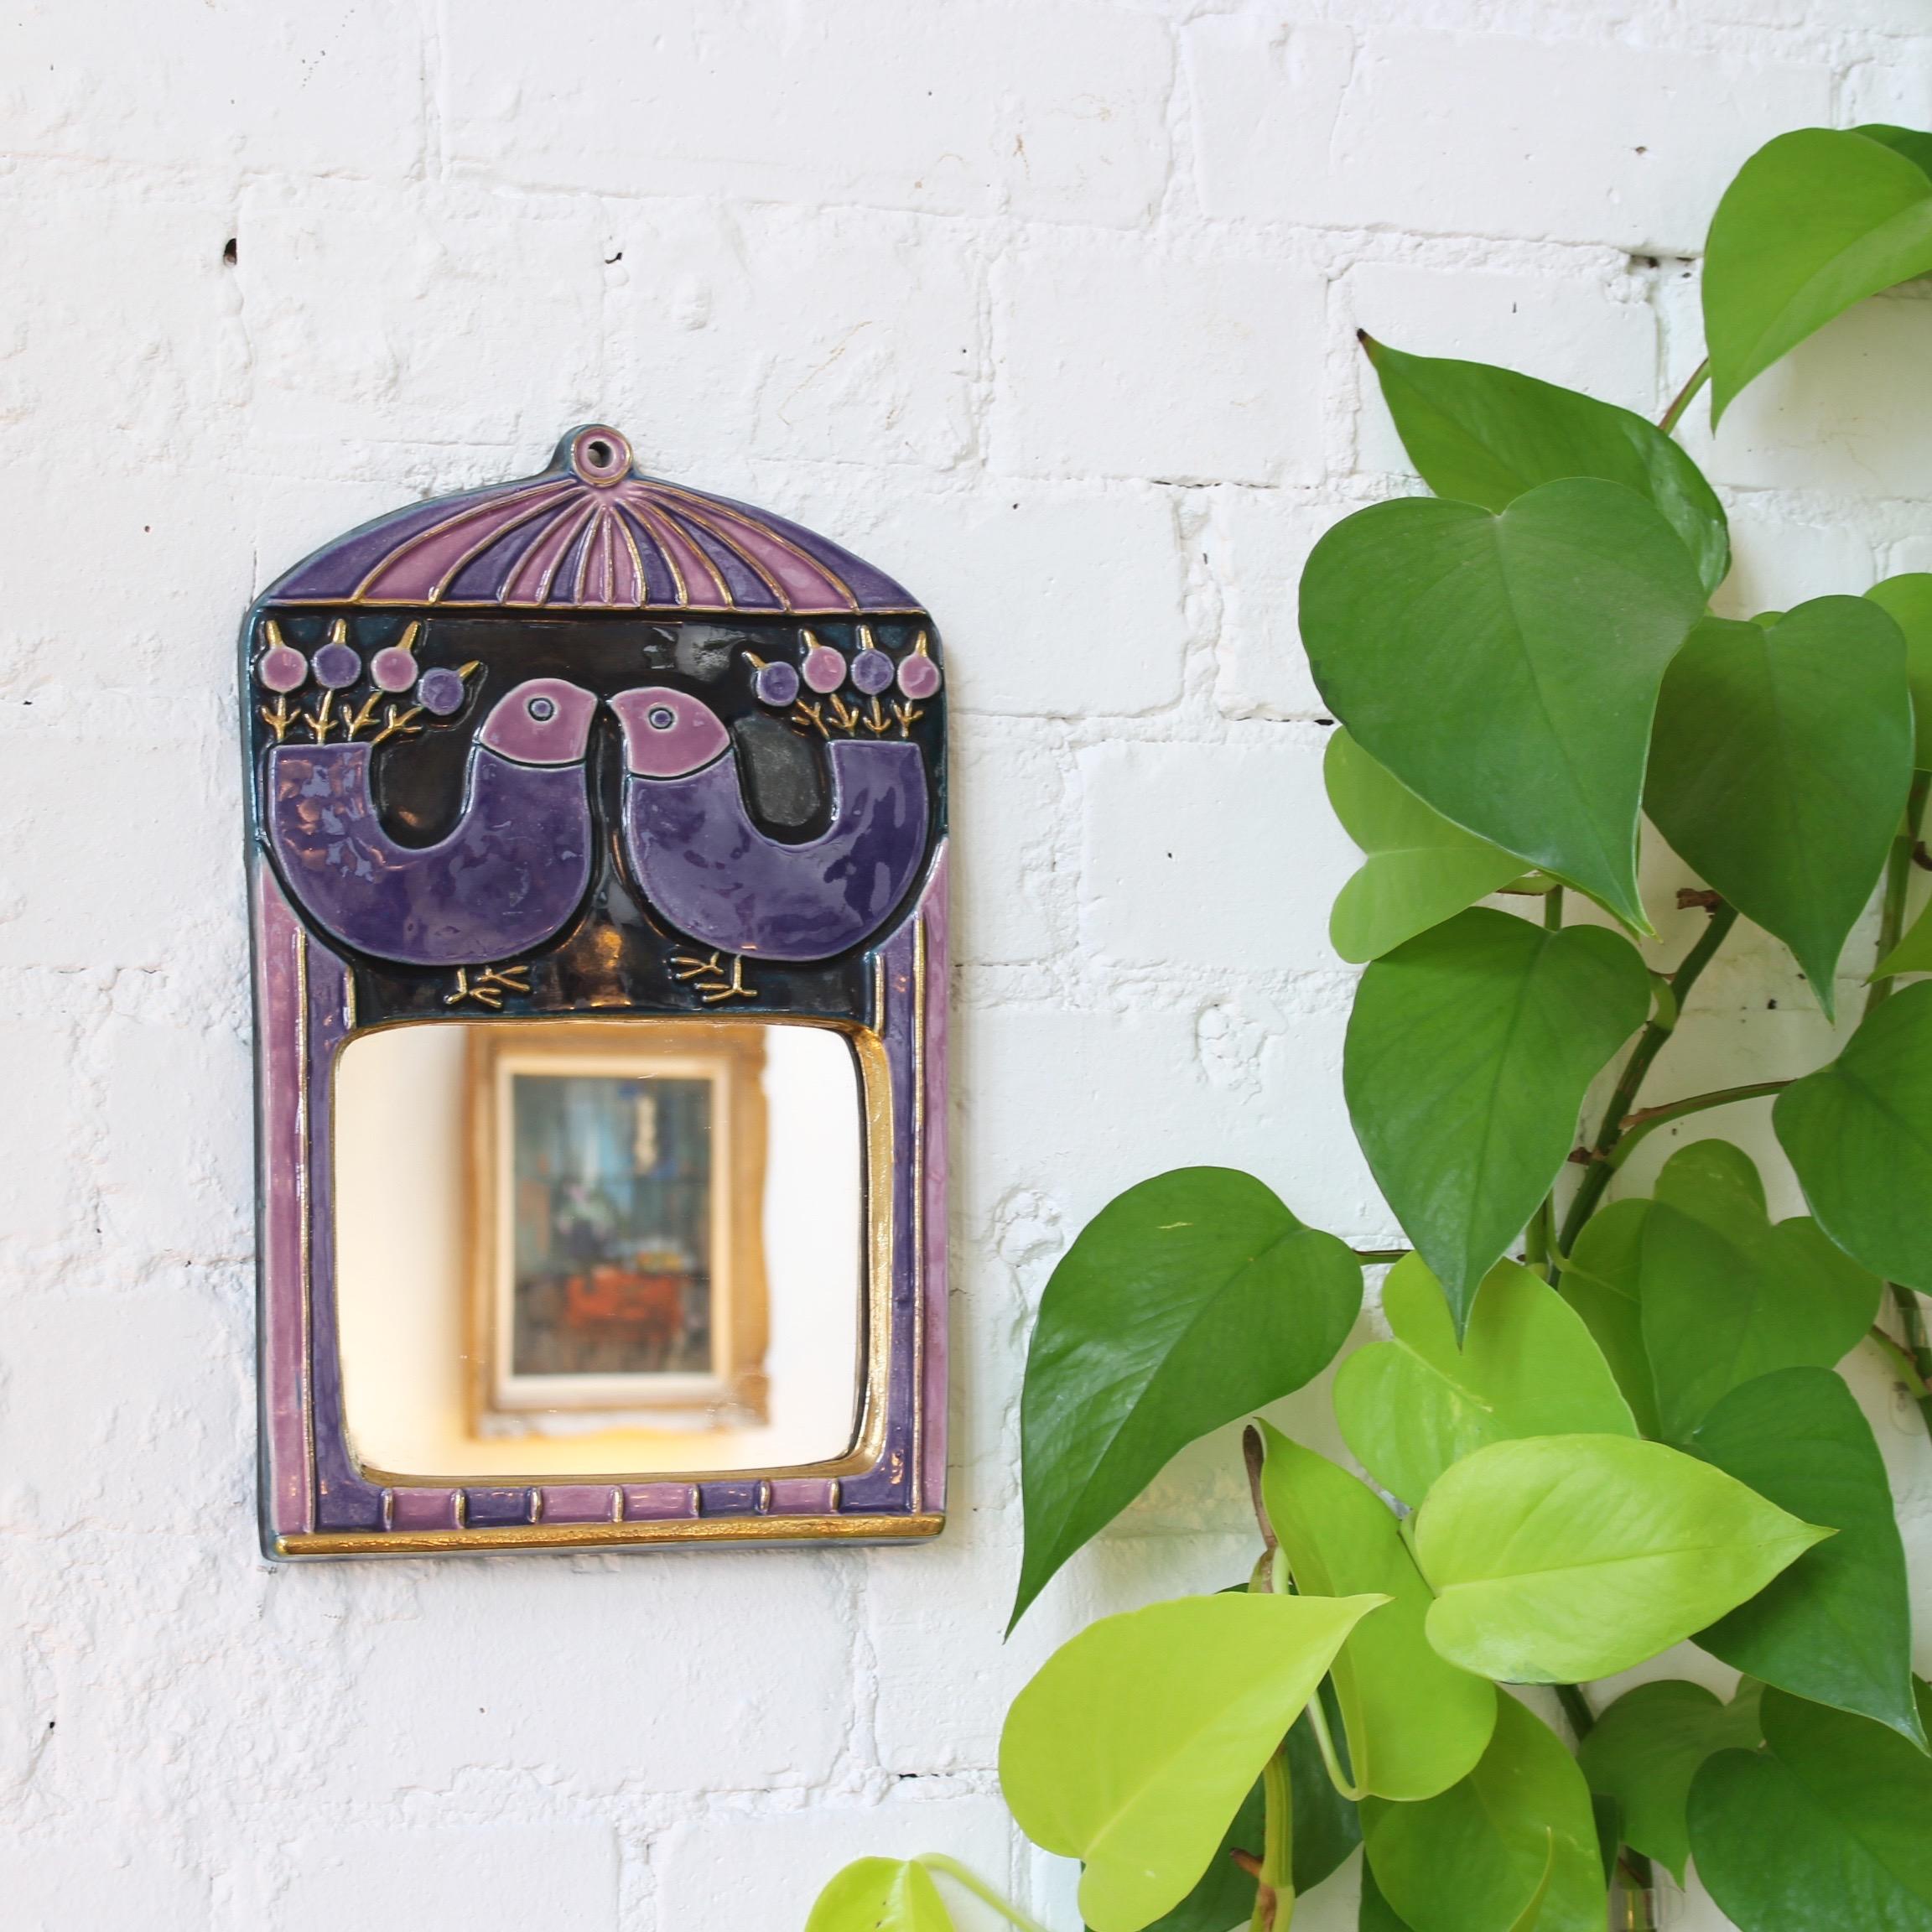 Ceramic wall mirror with purple and mauve glaze and stylized birds (circa 1970s) by Mithé Espelt. A delightful decorative wall mirror topped with a pair of whimsical birds above the curved rectangular mirror. The mirror is framed with a gold crackle